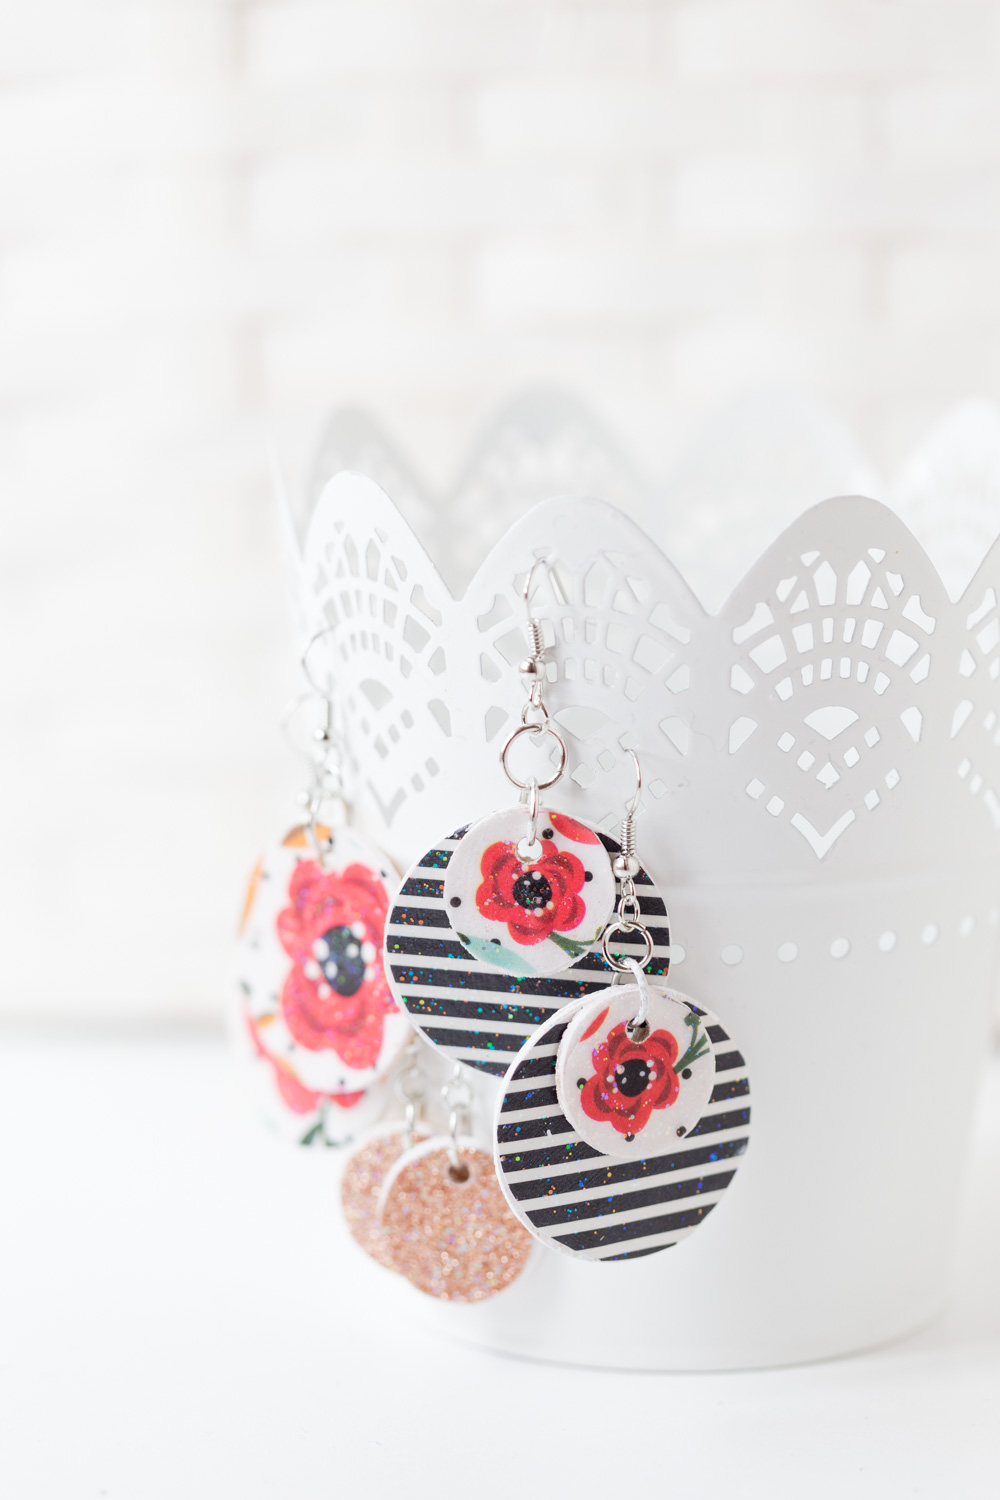 These Floral Wooden Mod Podge Earrings are a fun a simple craft idea that you can wear to match any style! They are great for craft groups, parties and gifts! 